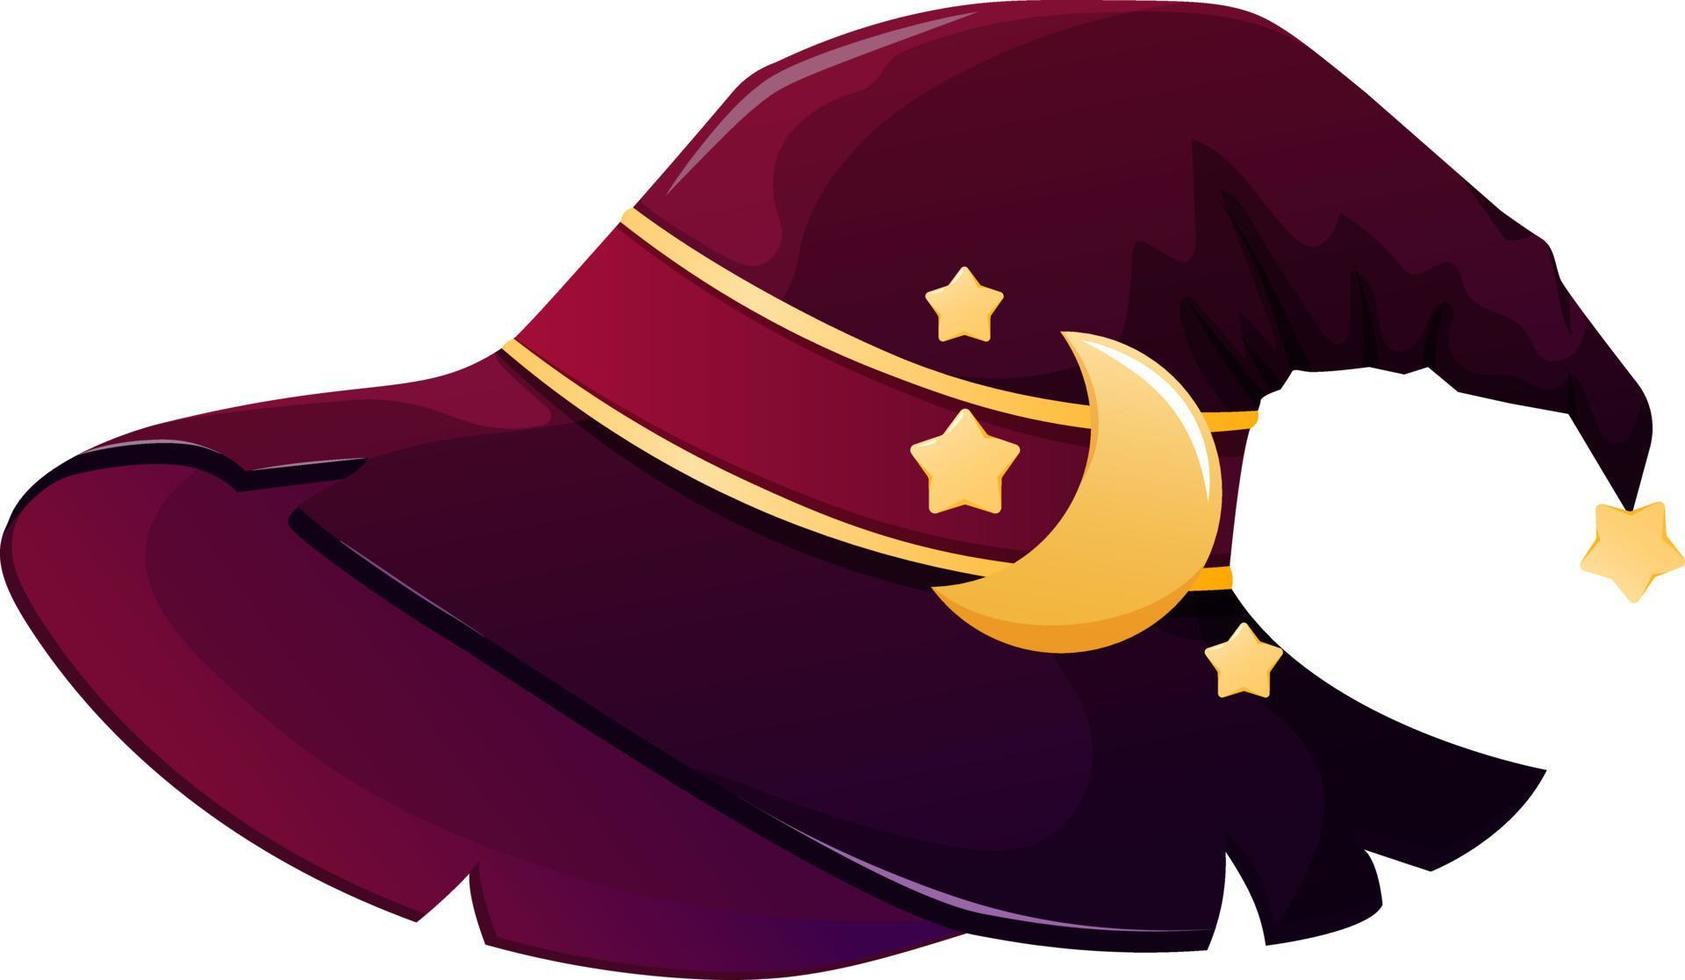 Witch hat with stars and moon in cartoon style isolated vector